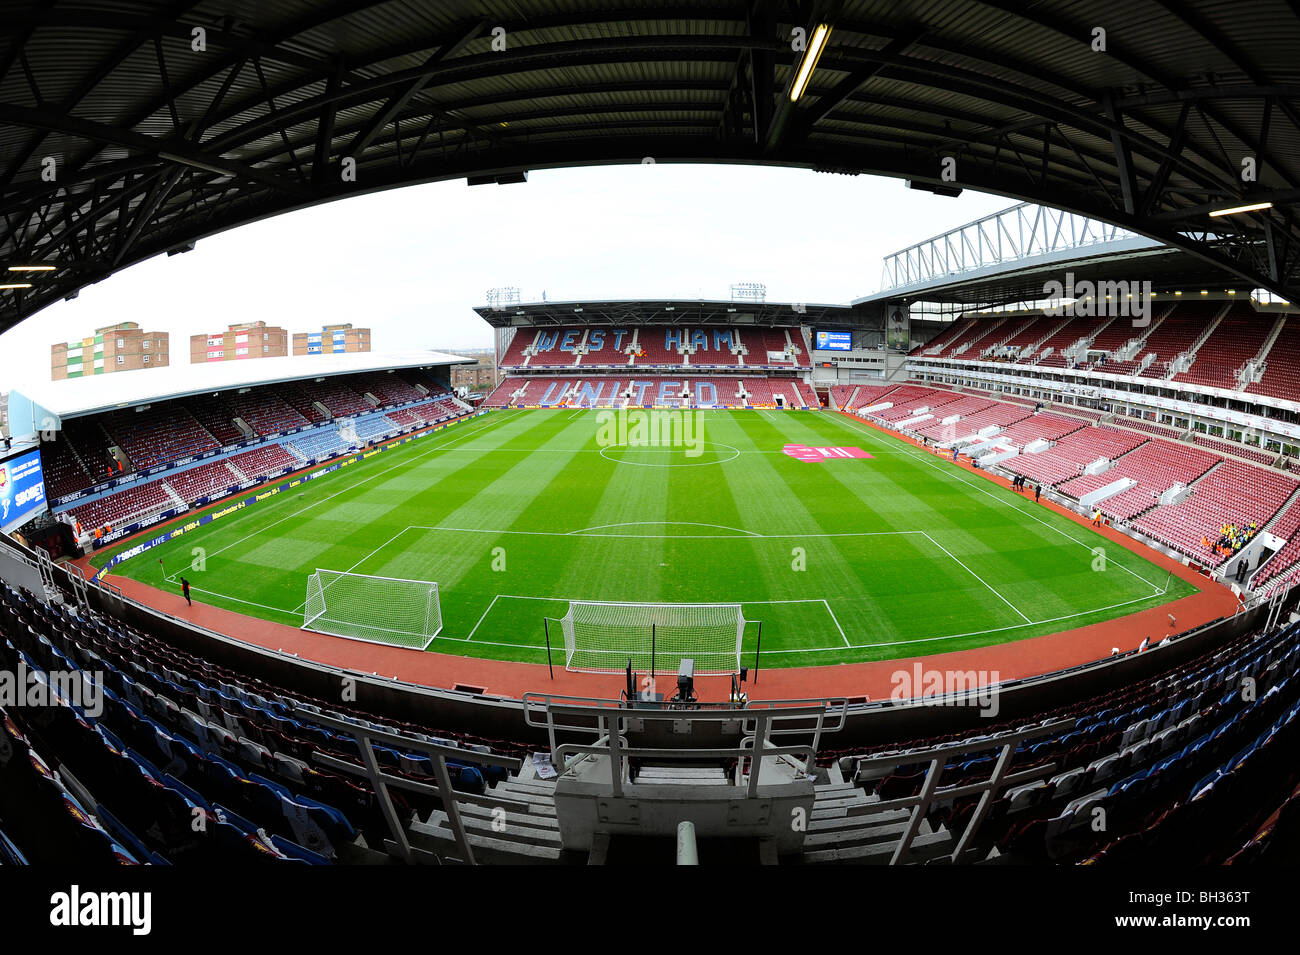 View inside the Boleyn Ground Stadium (also known as Upton Park), London. Home of West Ham United Football Club Stock Photo